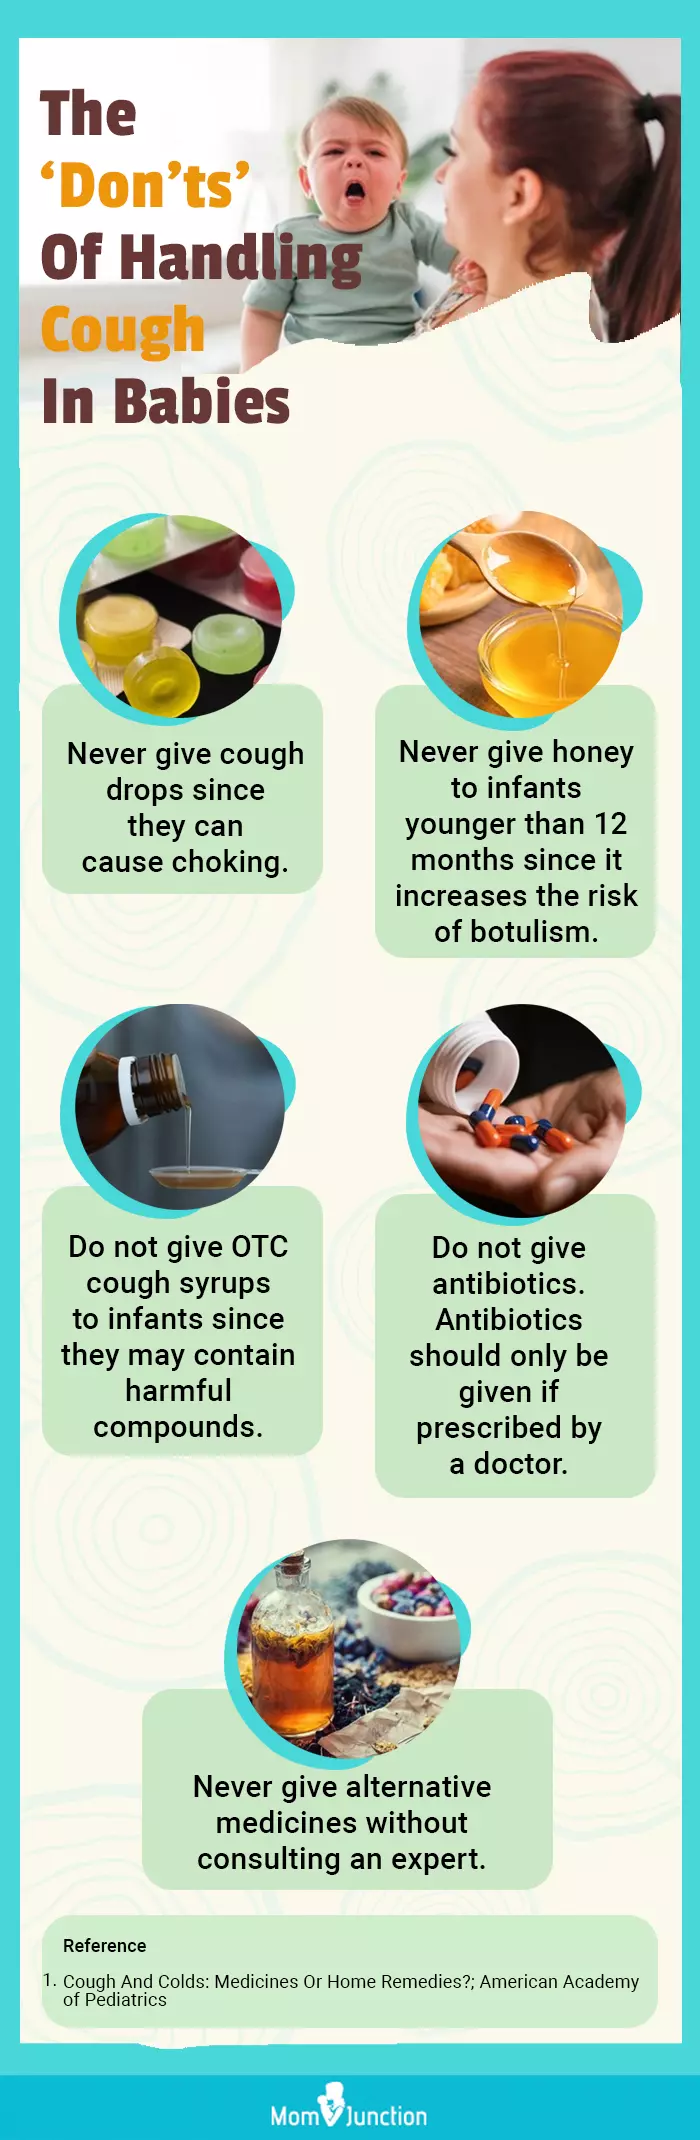 the donts of handling cough in babies (infographic)